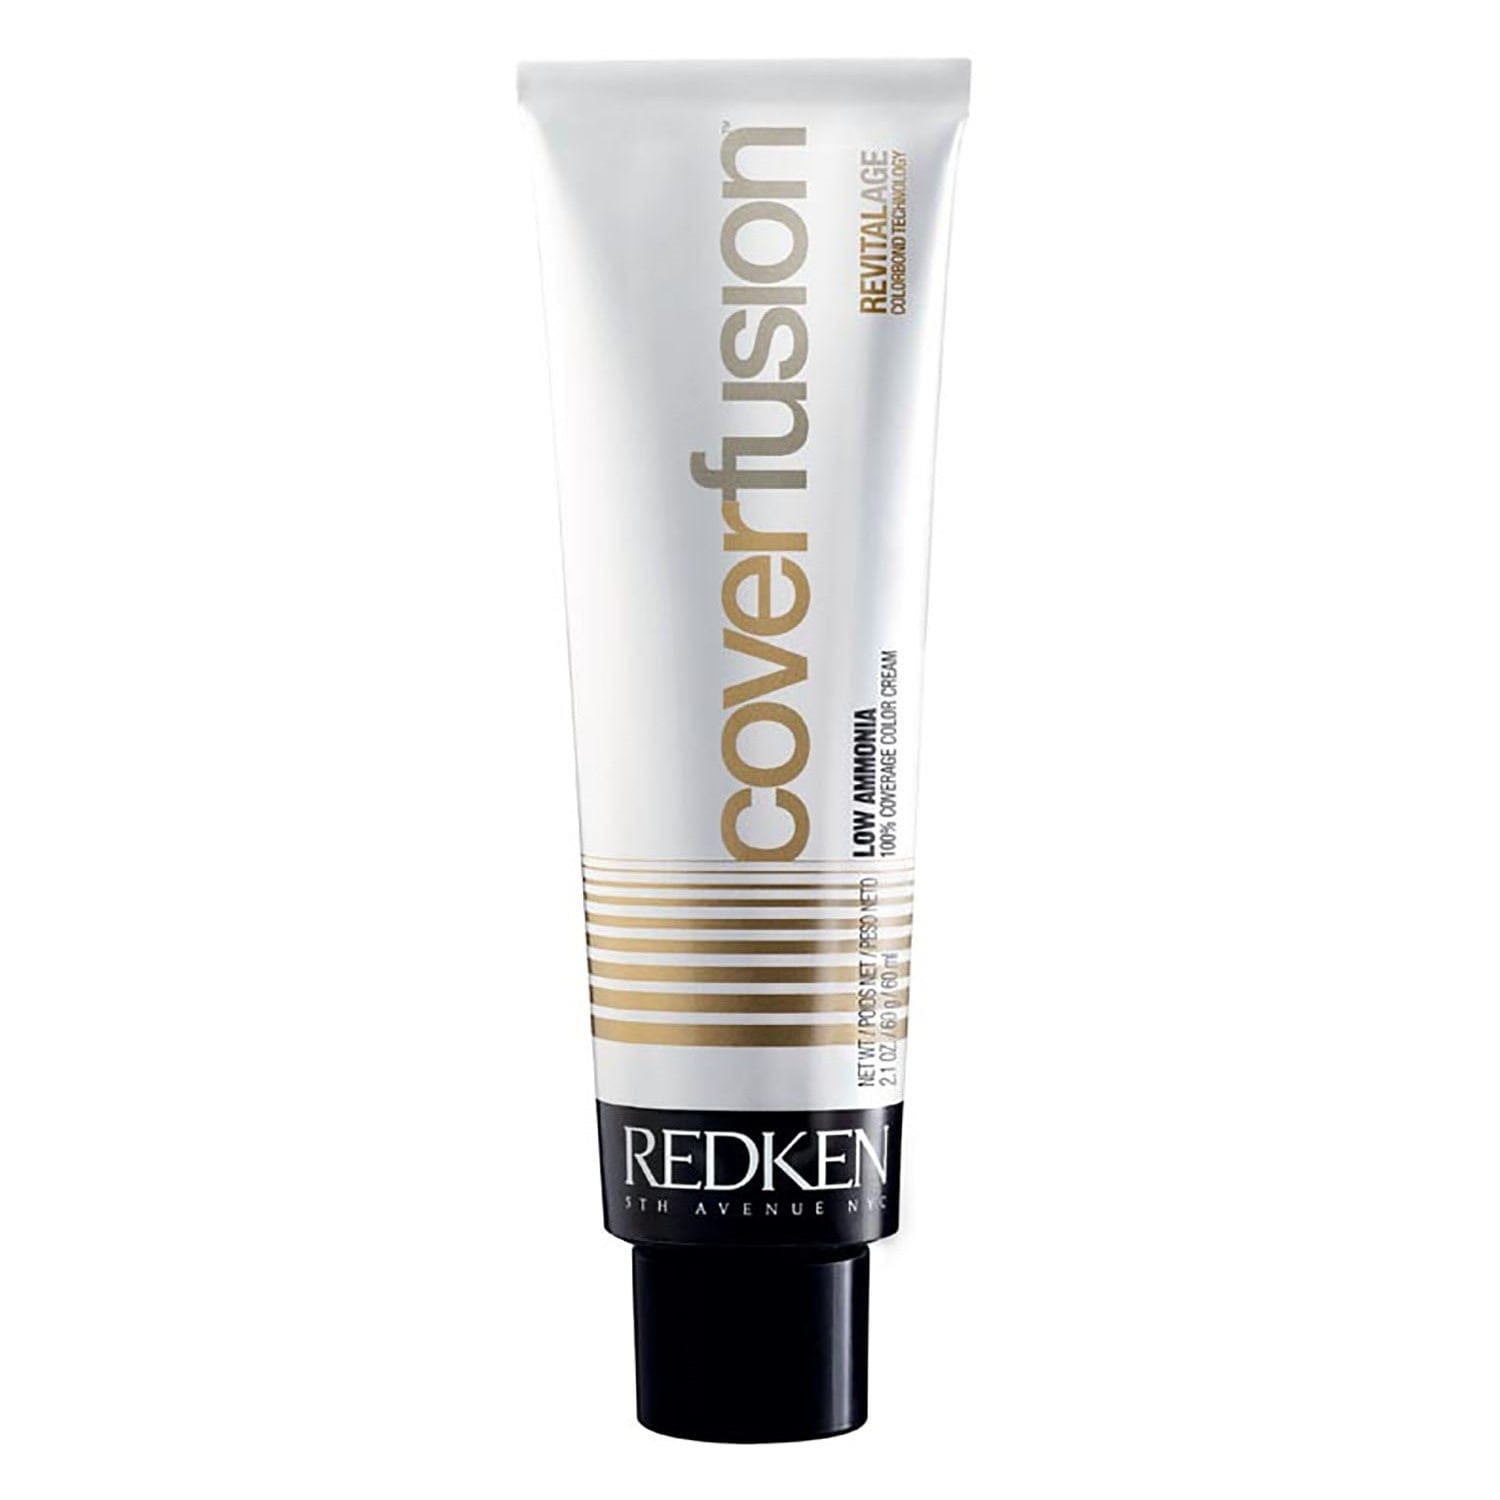 Redken® Cover Fusion 2NA LG0 - HairBeautyInk